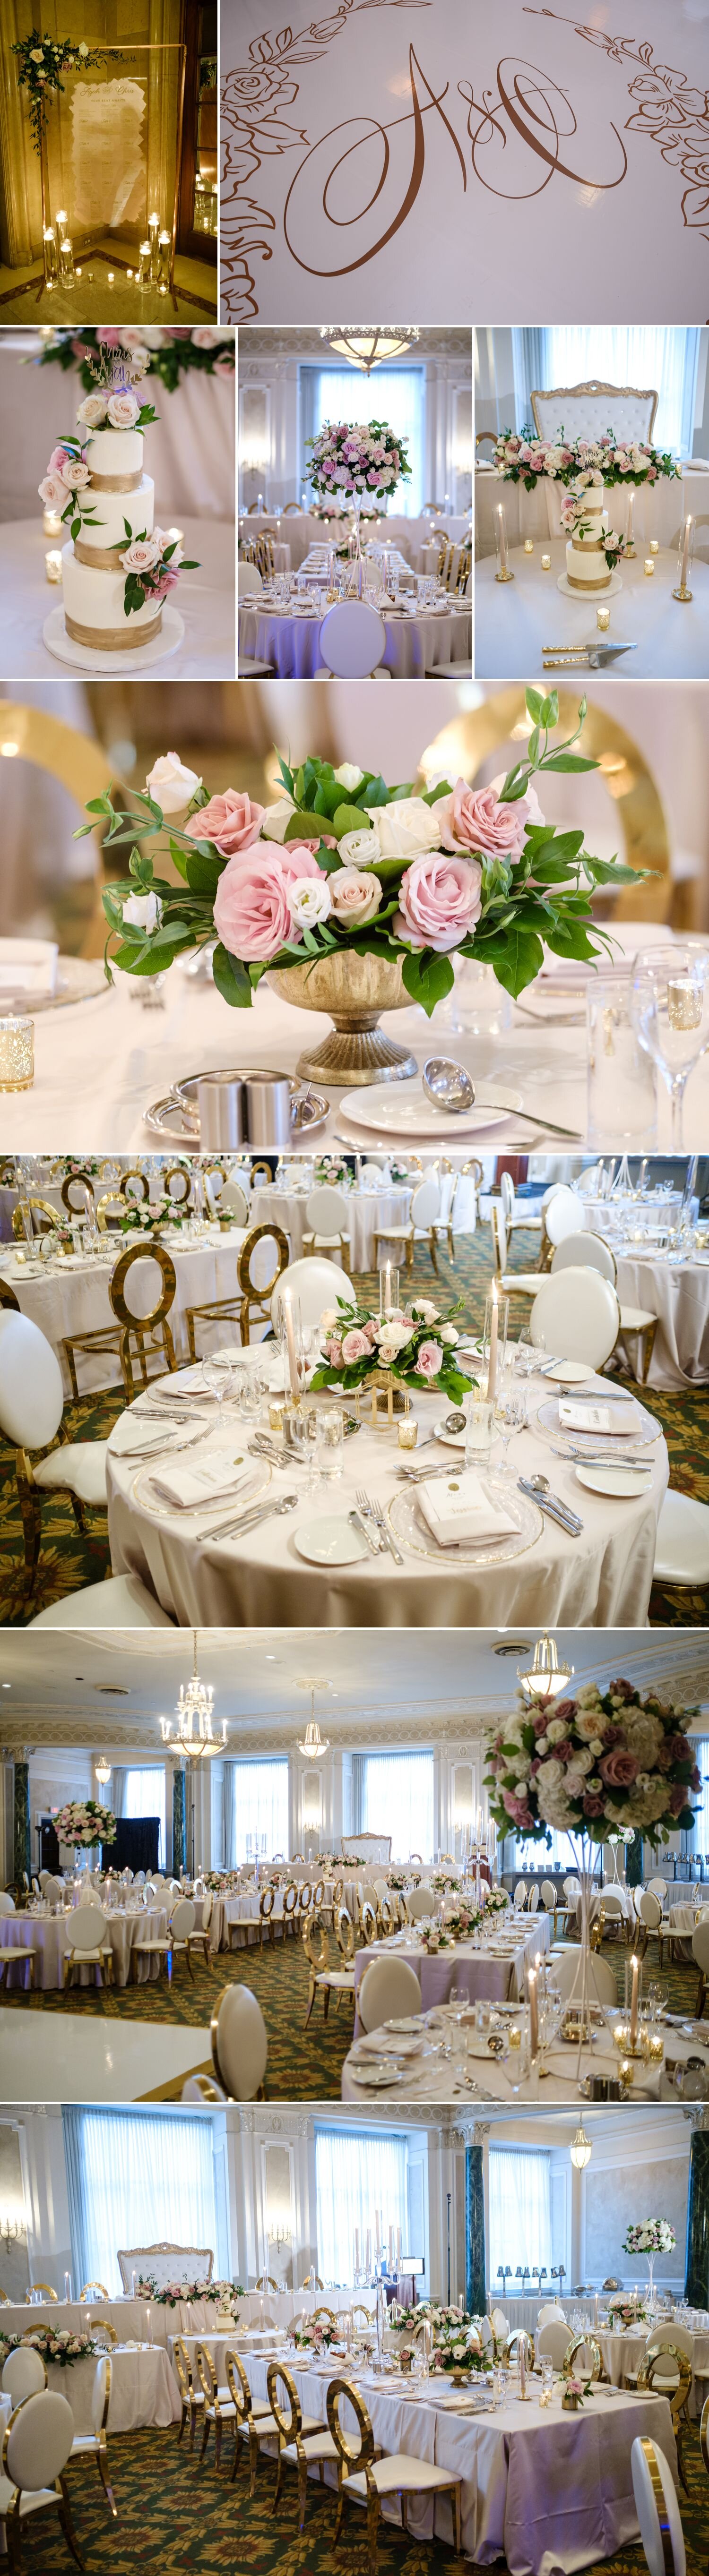 wedding details in the drawing room of the fairmont chateau laurier in ottawa